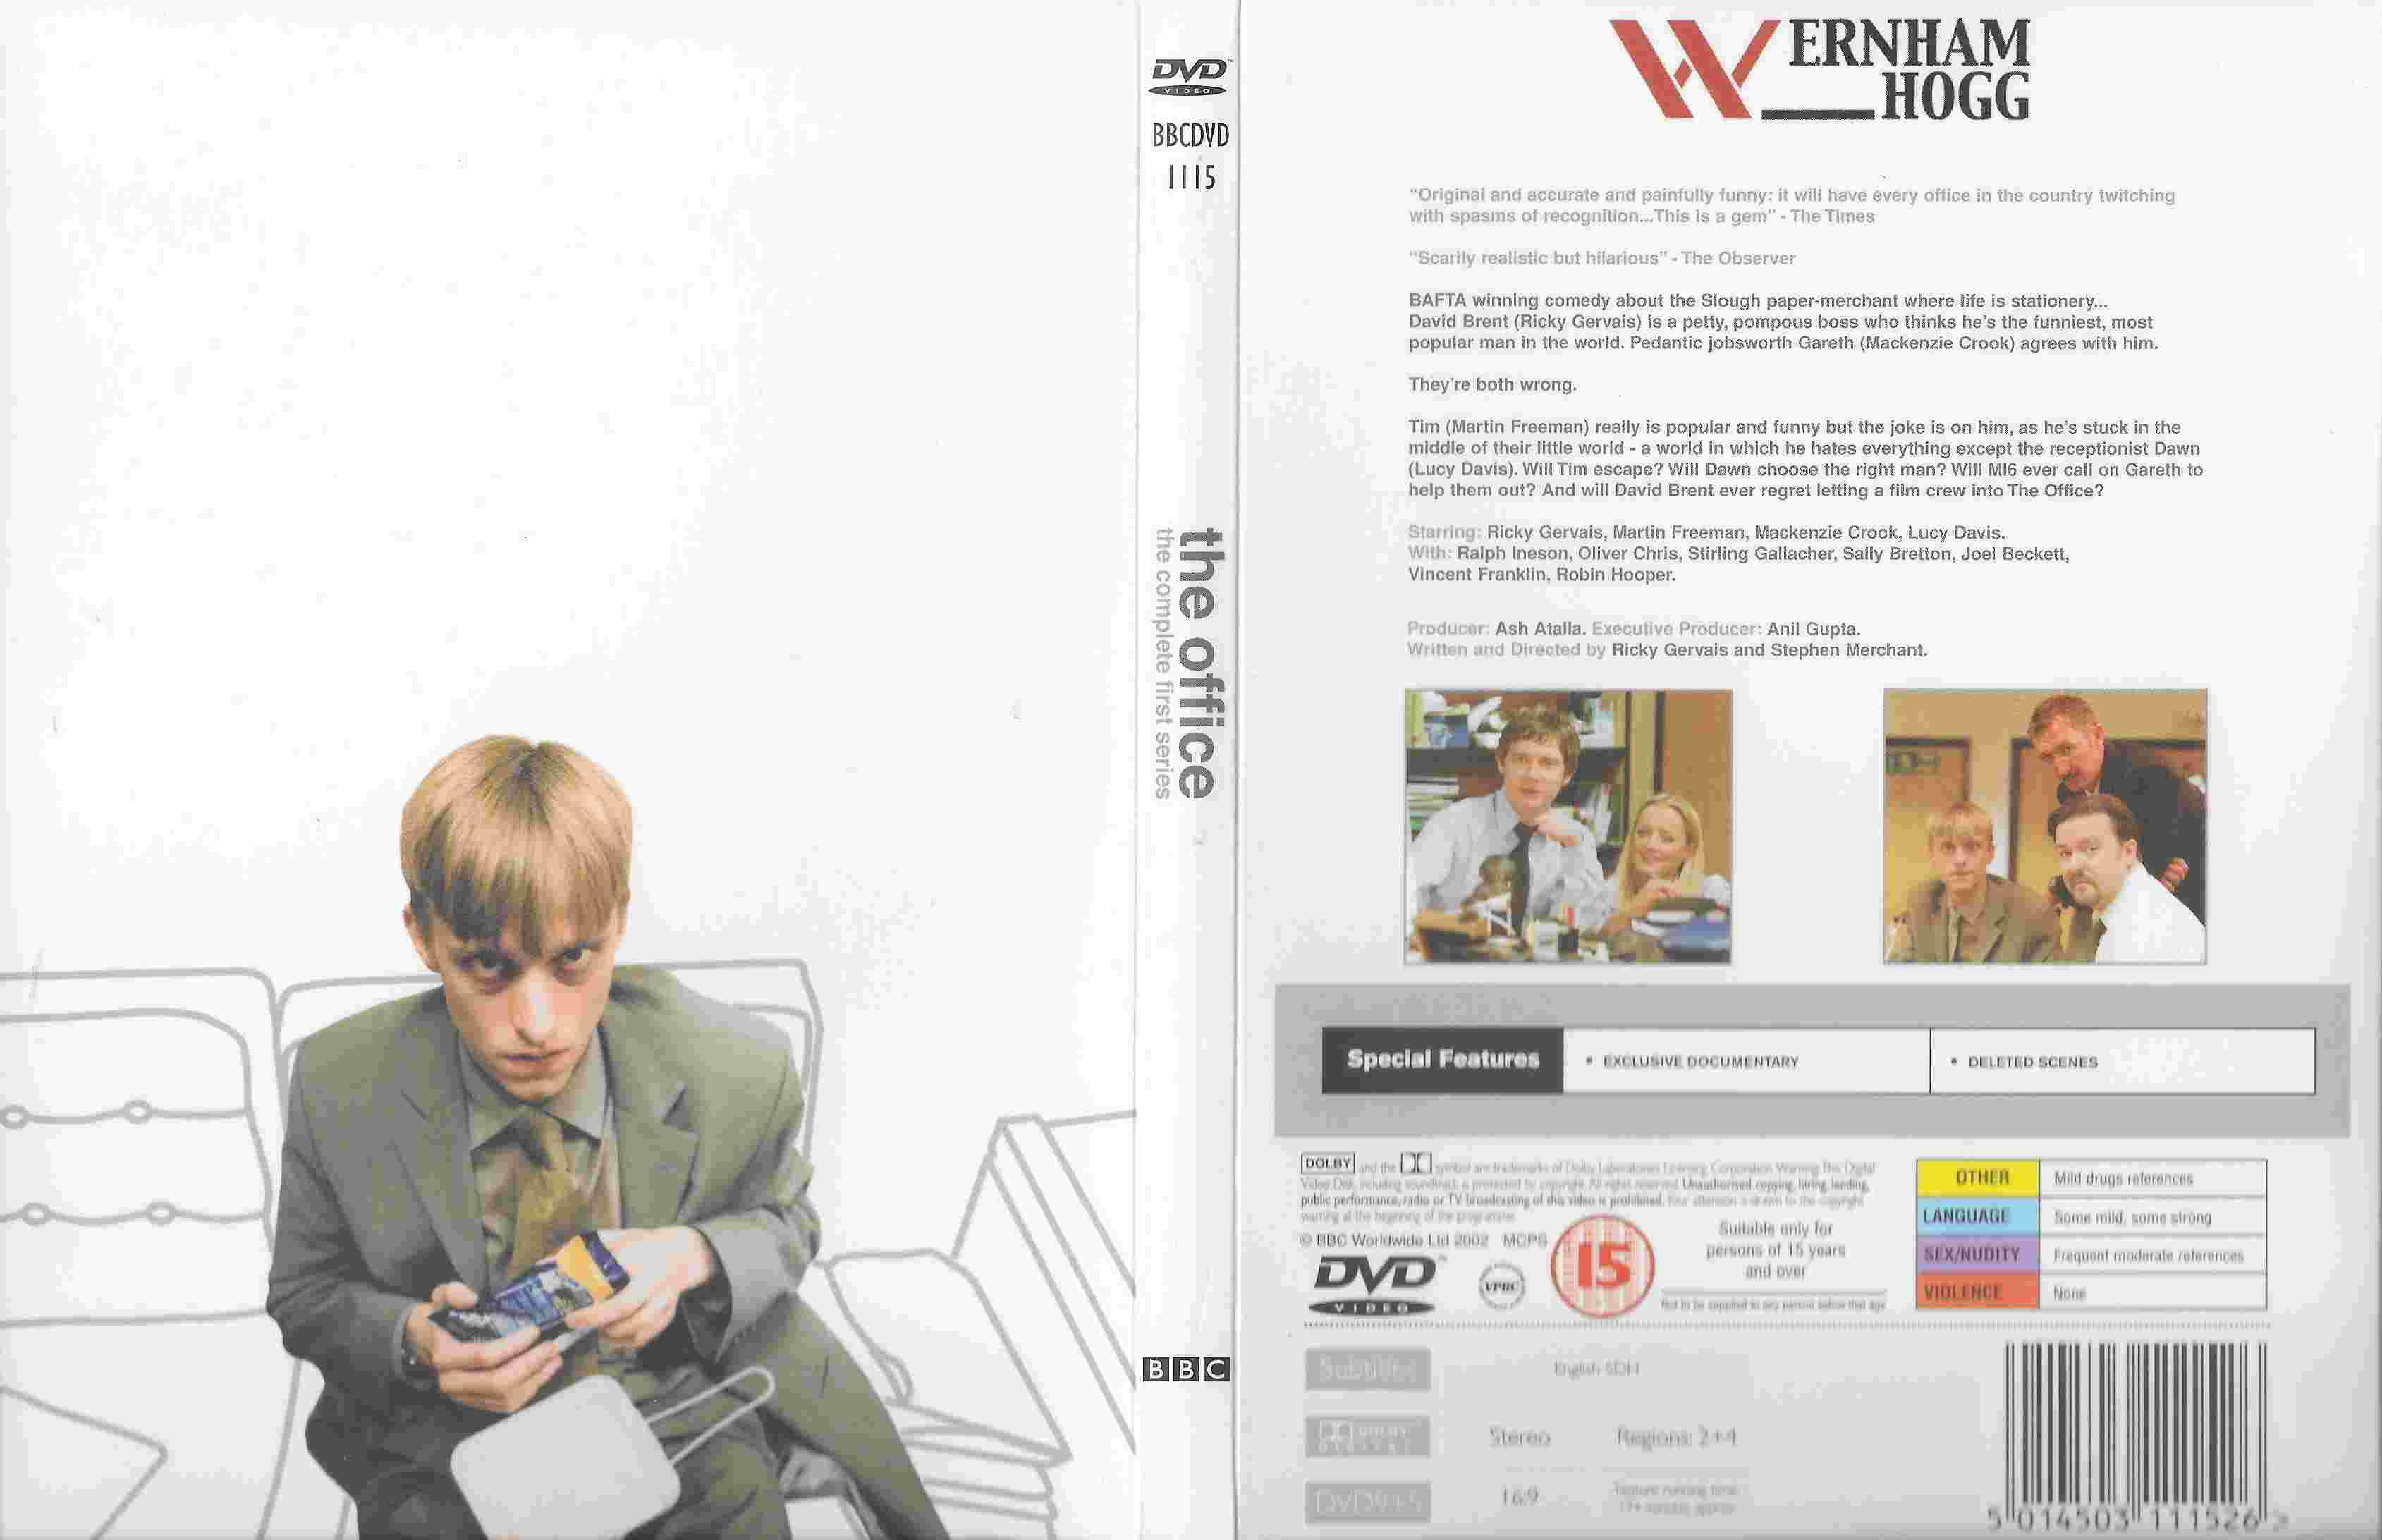 Inserts from BBCDVD 1115